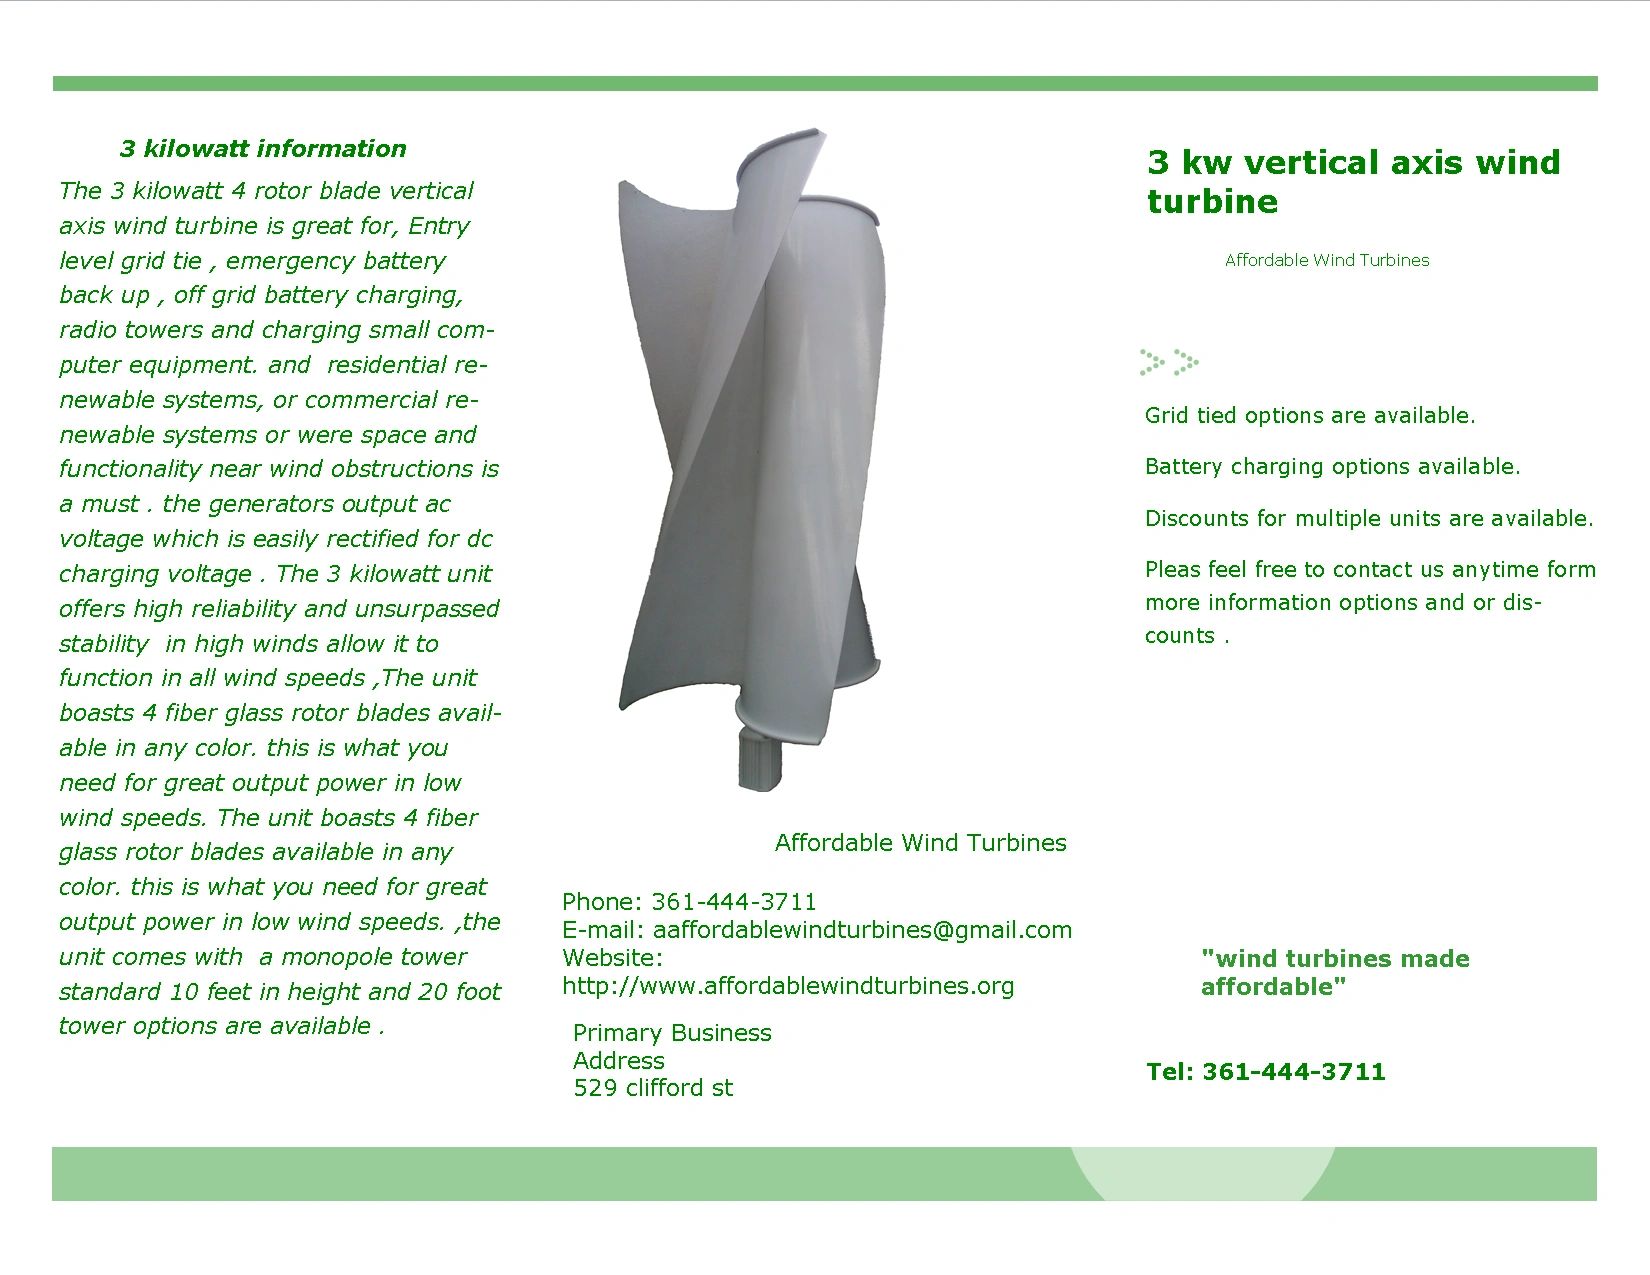 4 kw vertical axis wind turbine with tower